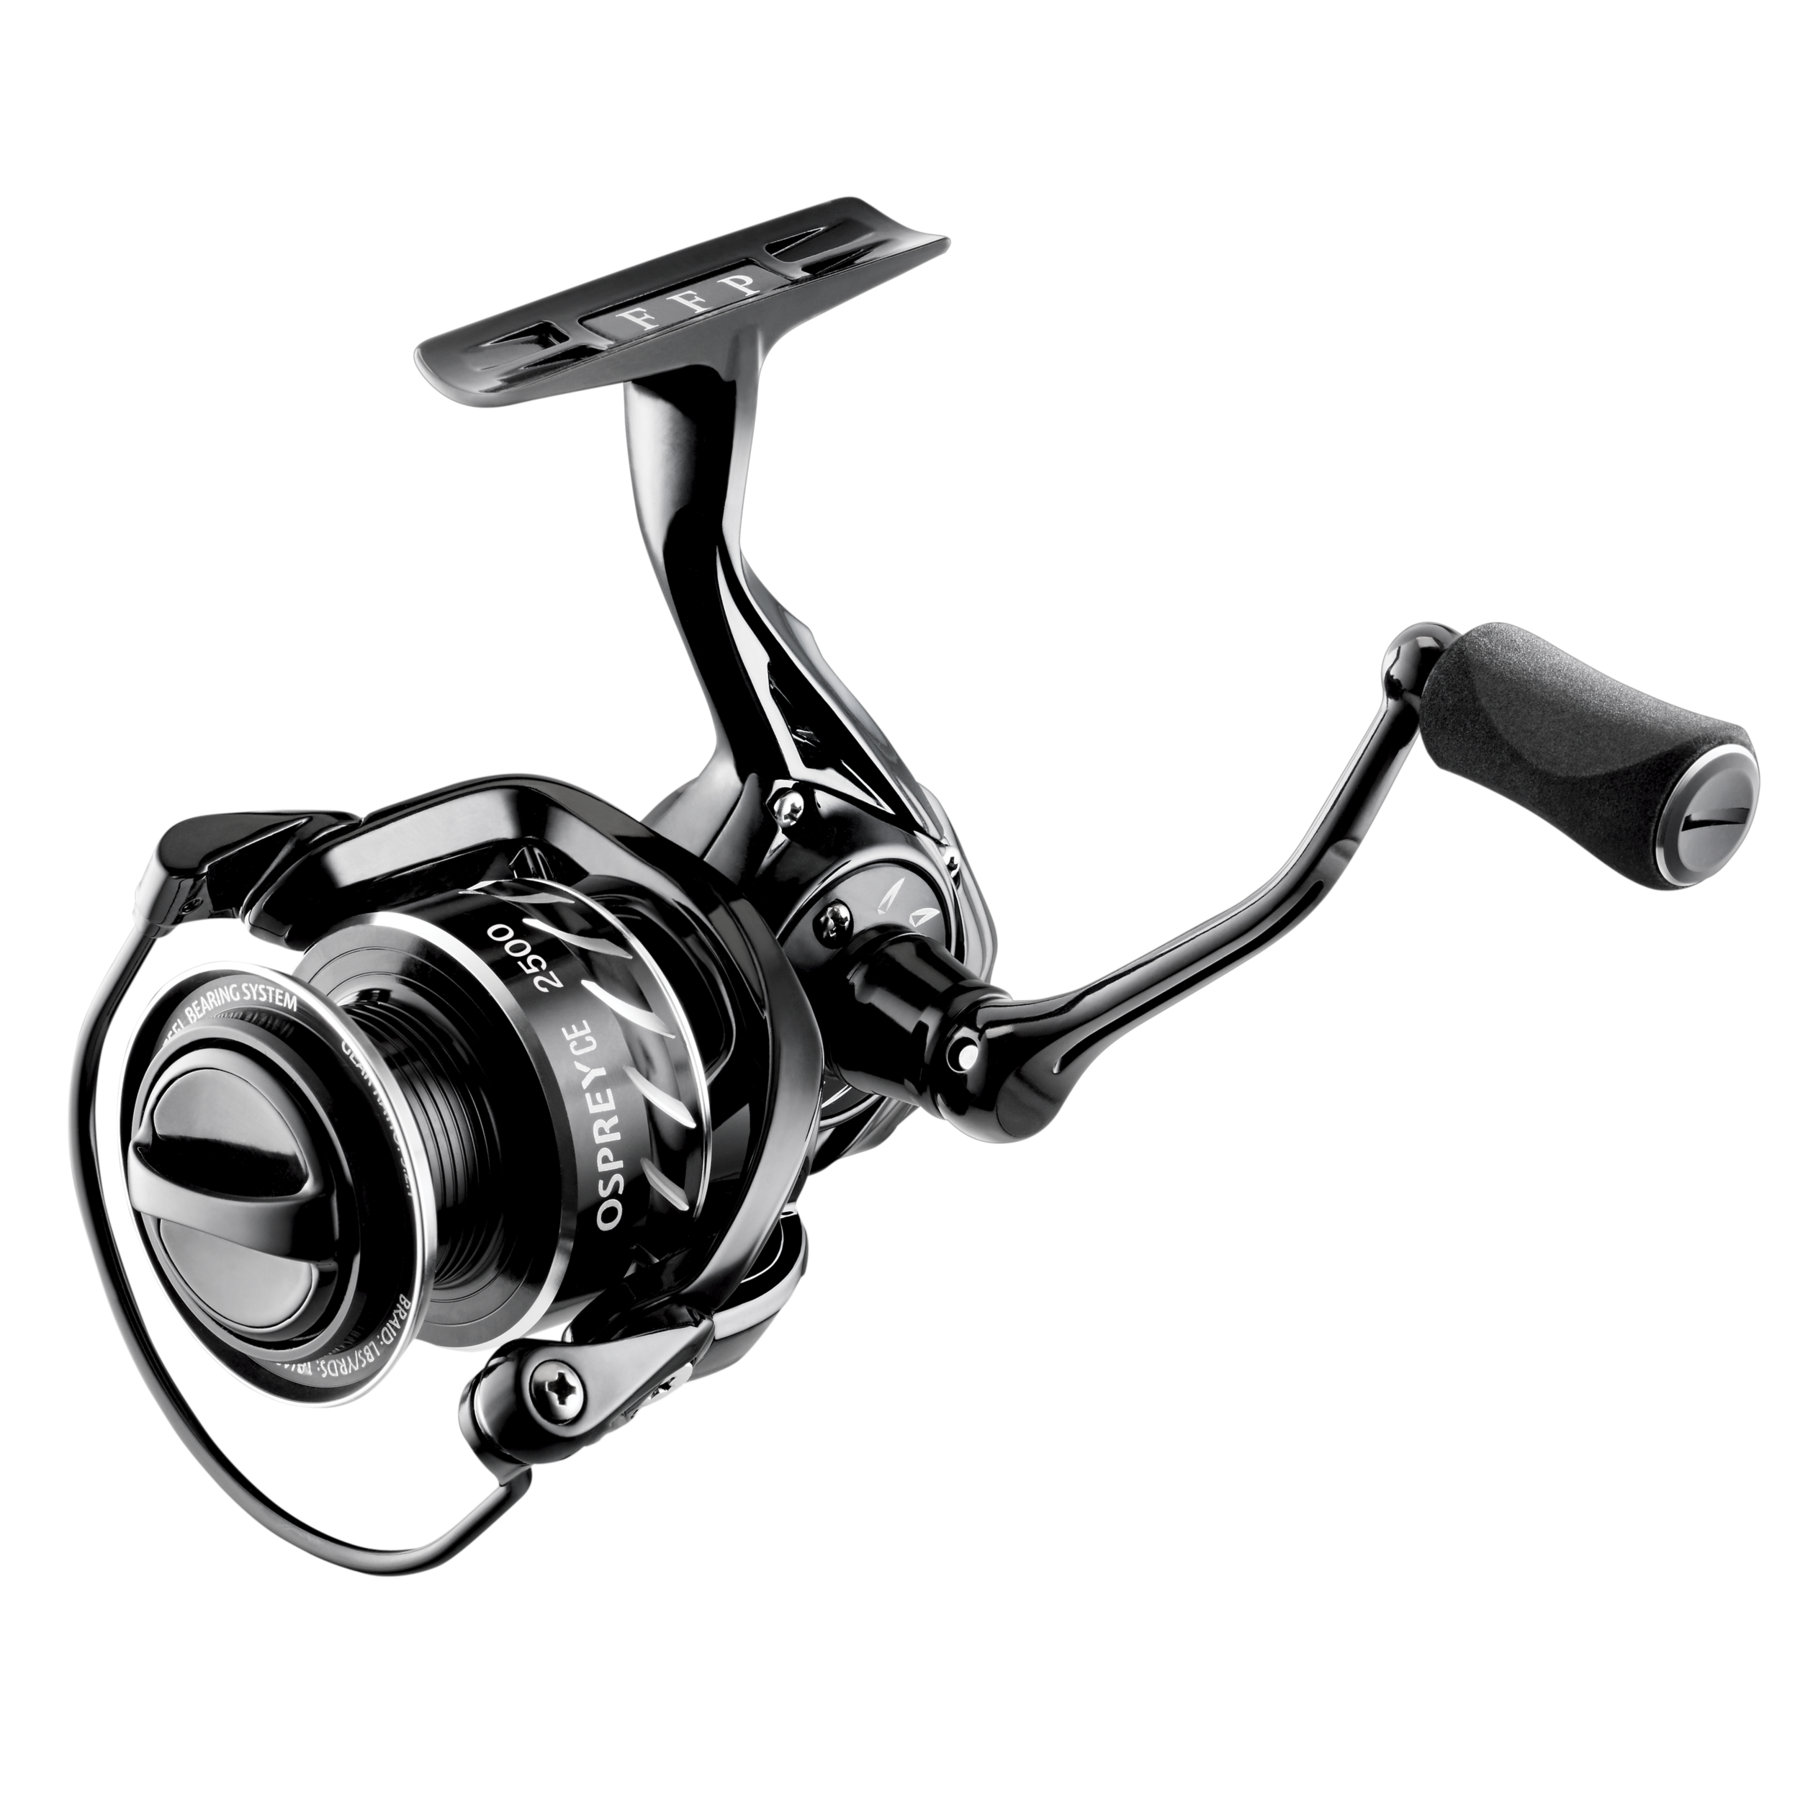 Florida Fishing Products Osprey CE 1000 Spinning Reel